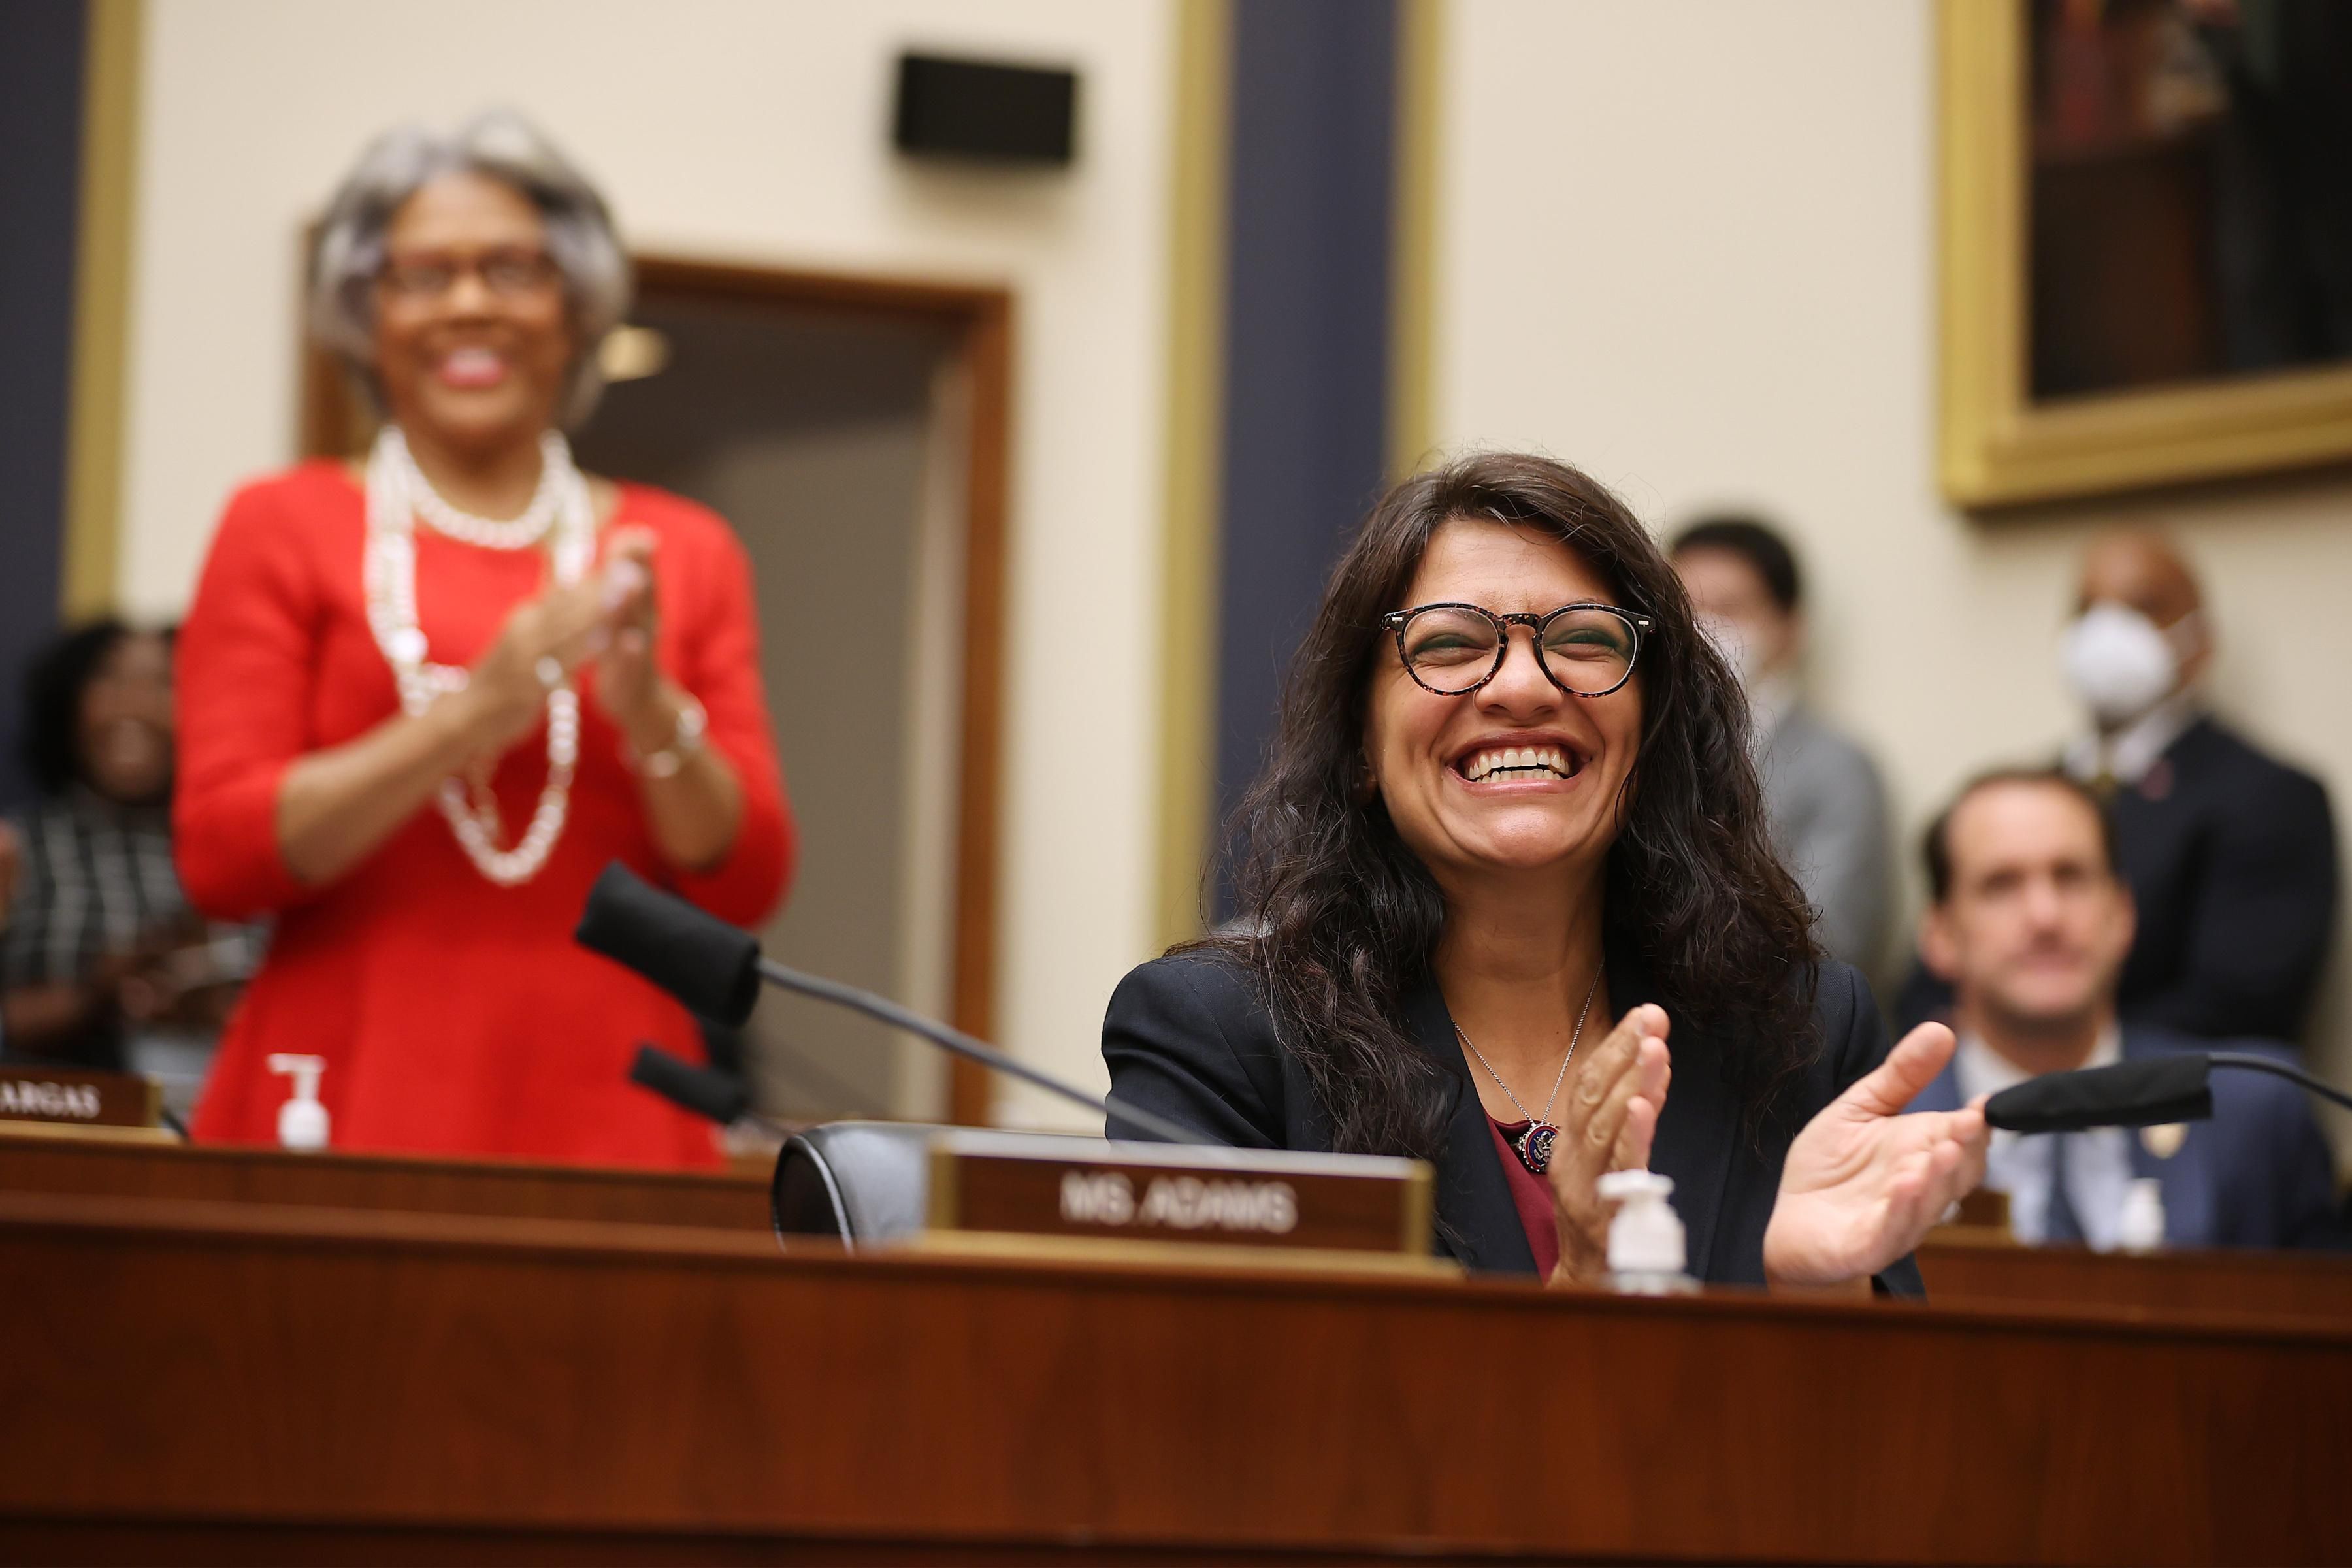 Rep. Rashida Tlaib (D-Mich.) attends a House Financial Services Committee hearing on July 20, 2021 in Washington, D.C. (Photo: Chip Somodevilla via Getty Images)